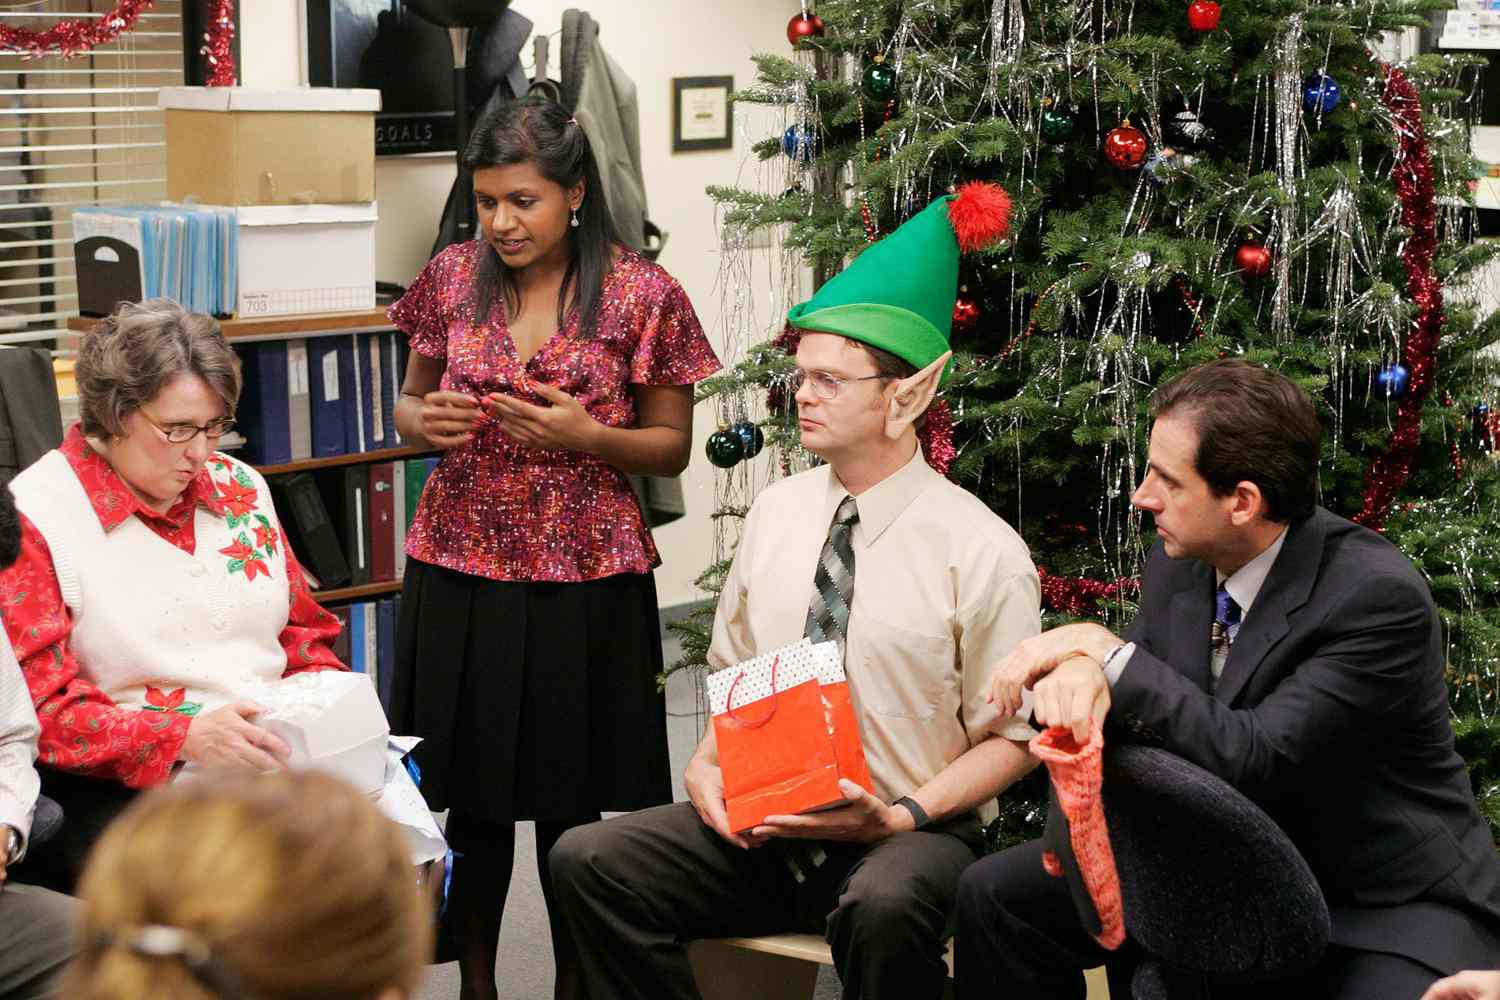 The Office: Every Christmas Episodes